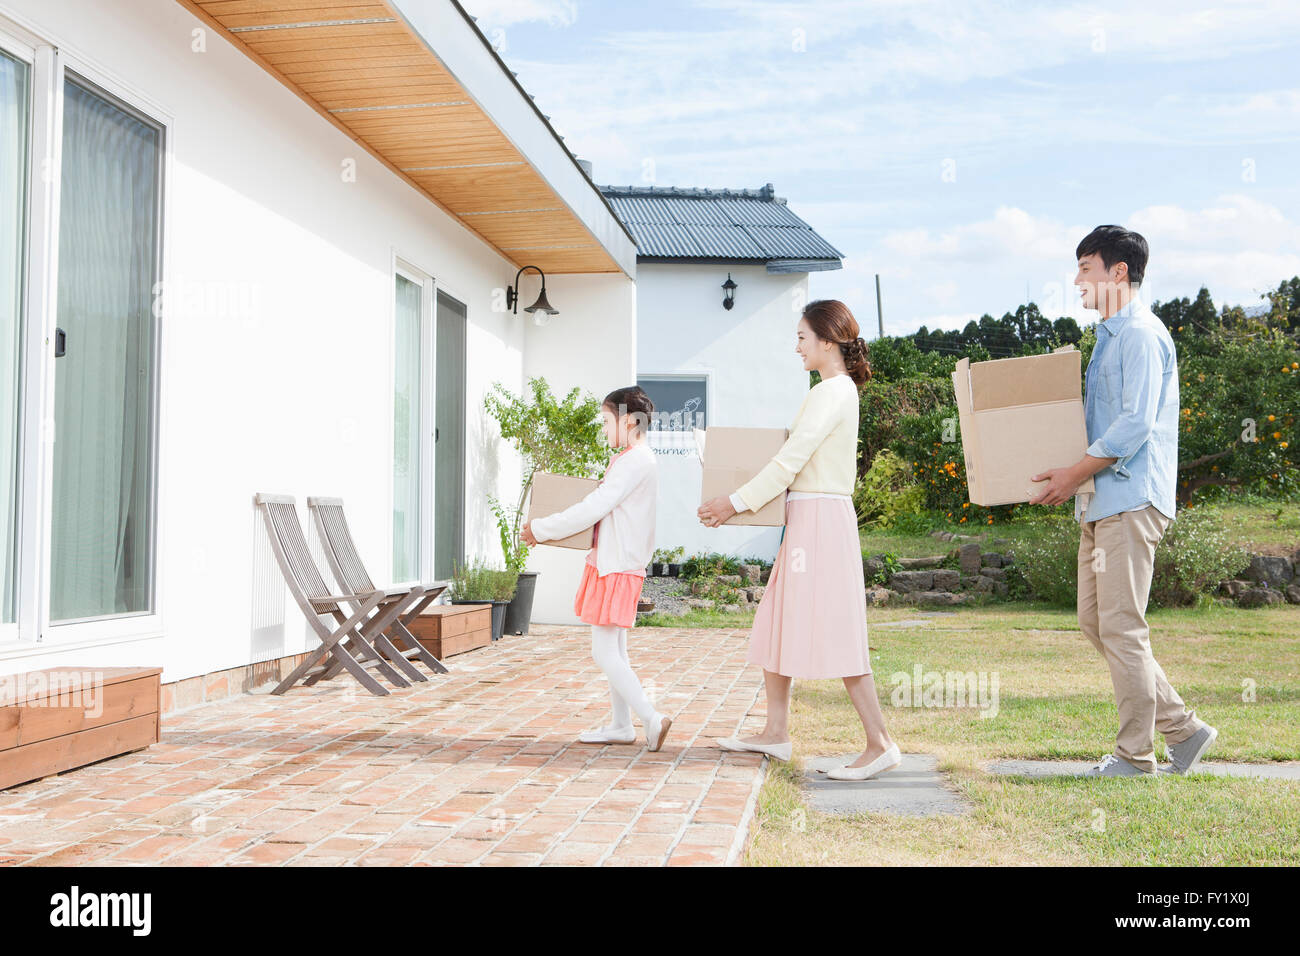 Girl and her parents moving together to the new house representing rural living Stock Photo